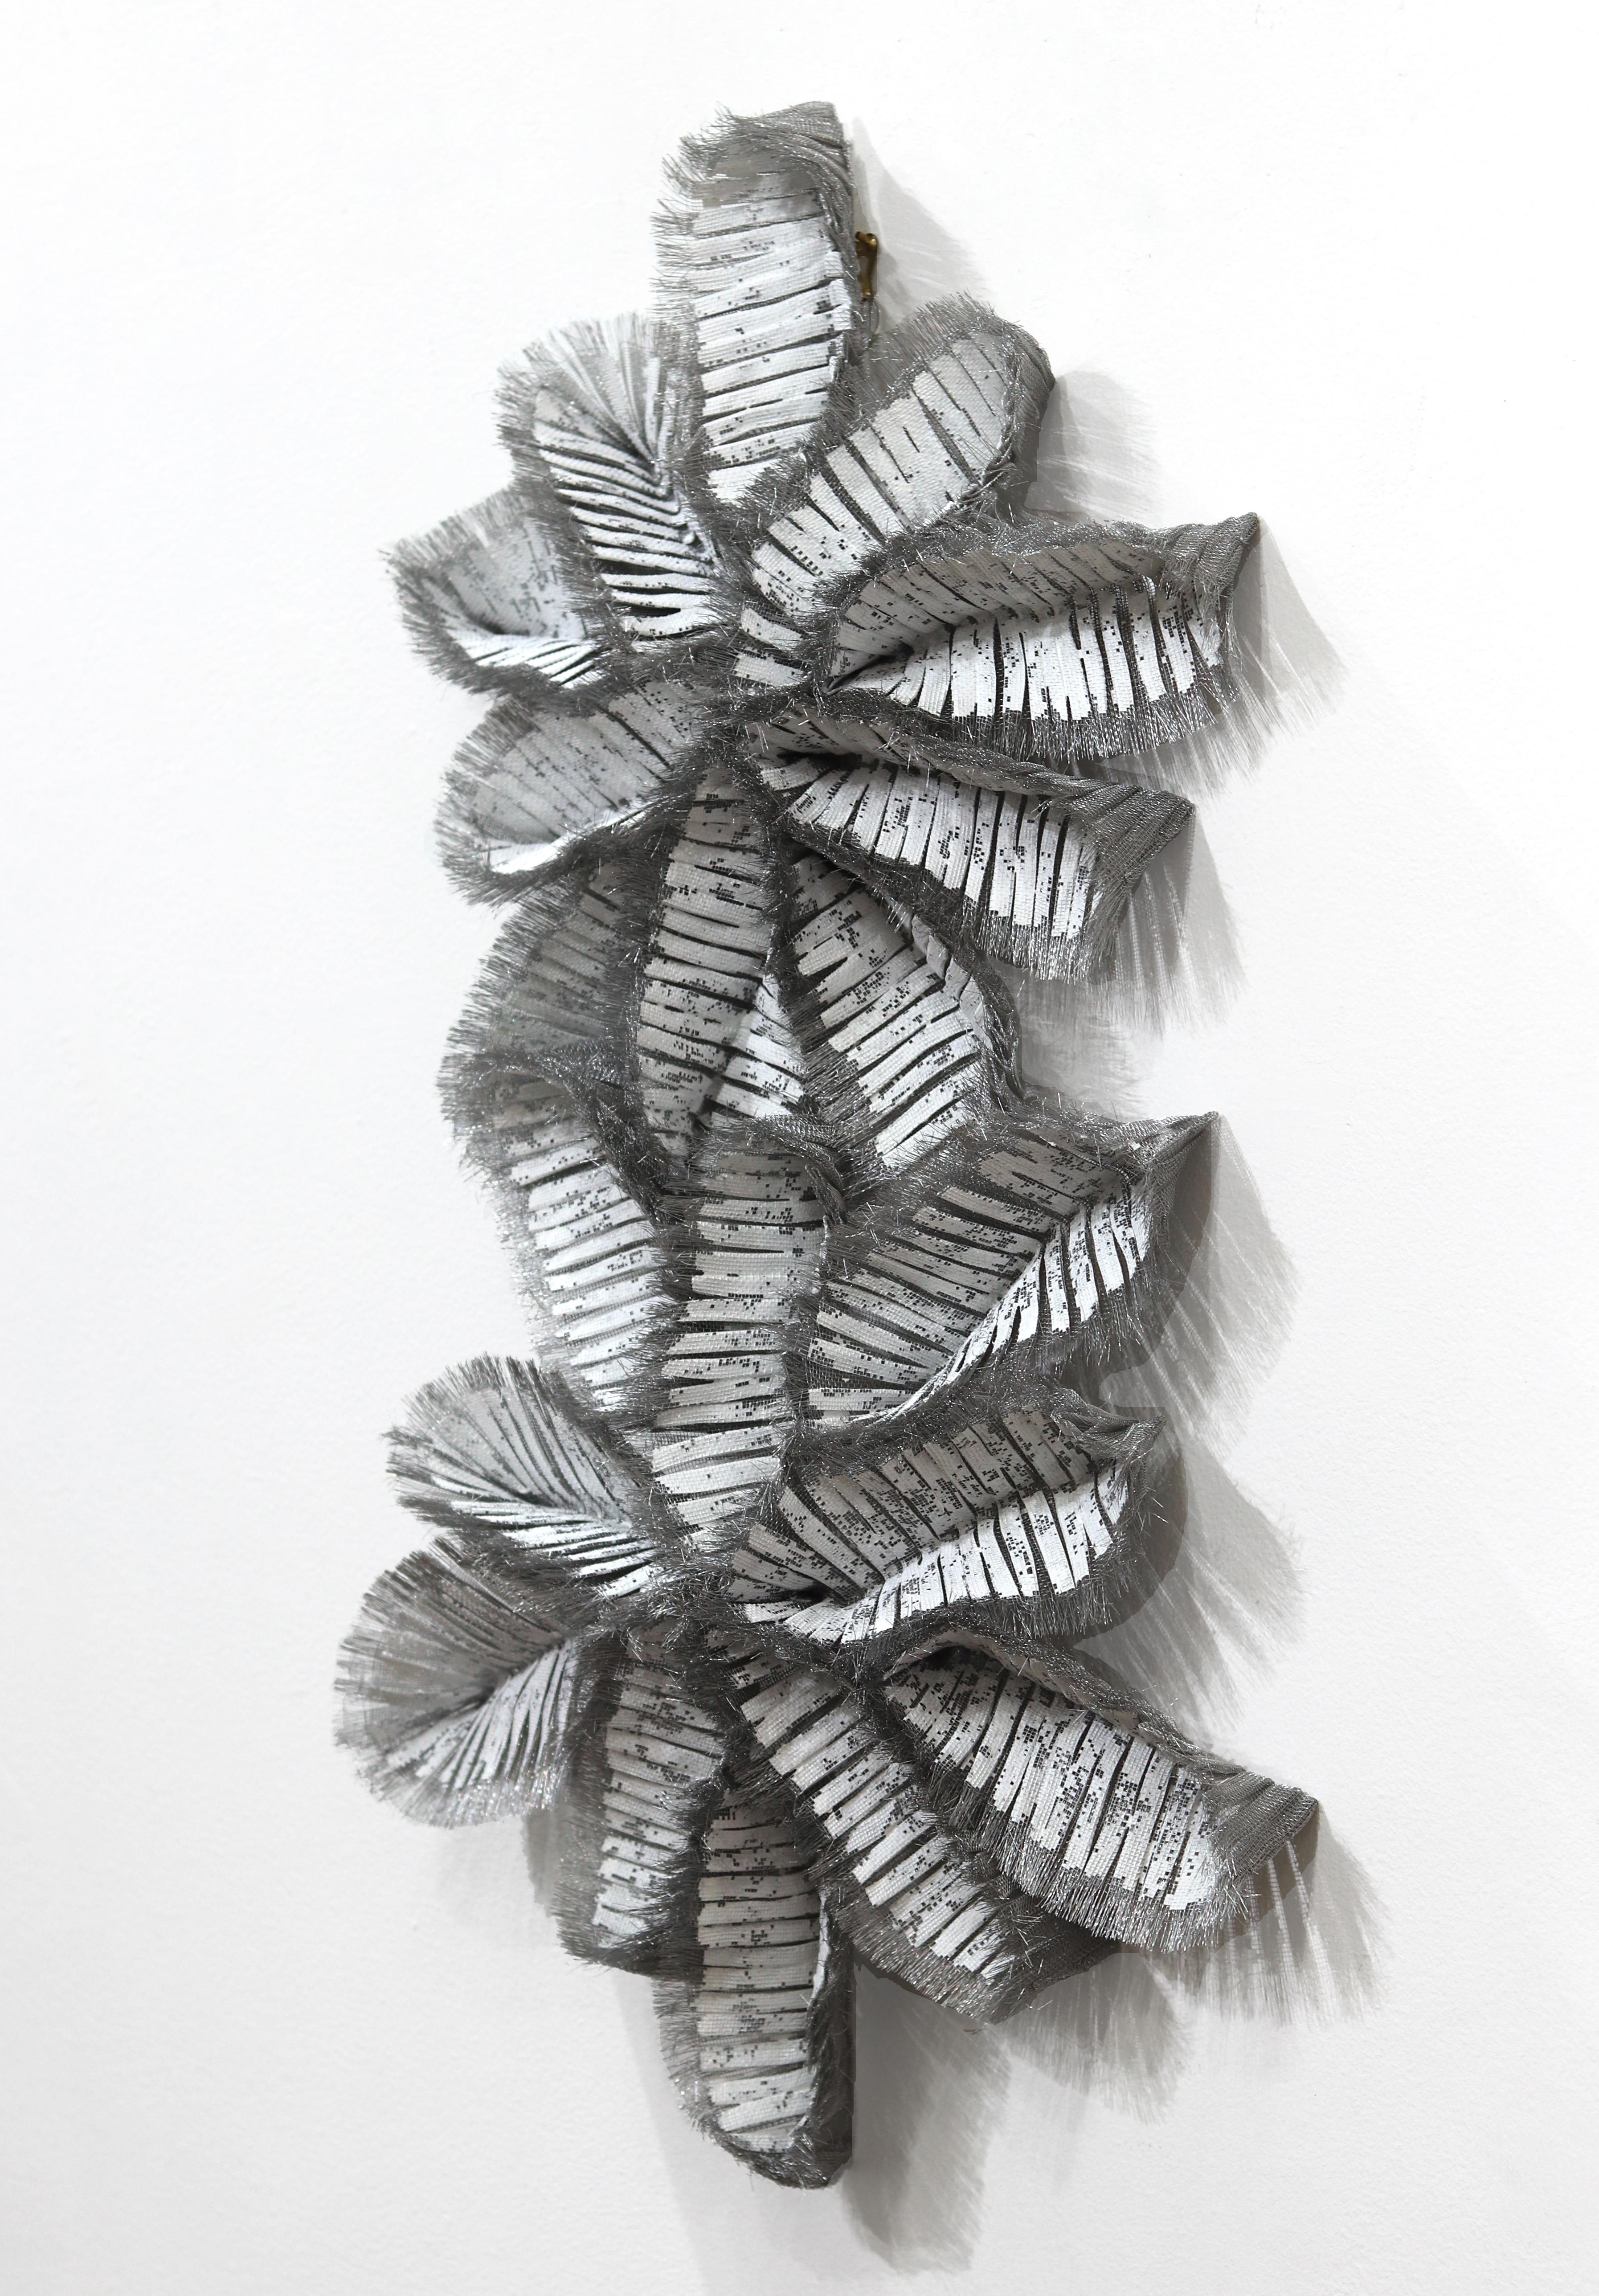 Atticus Adams' organically composed modern metal sculptures embody the transformative power of art, illustrating the creation of beauty, meaning, and emotional impact from industrial materials. Using mostly aluminum mesh—generally found in screen